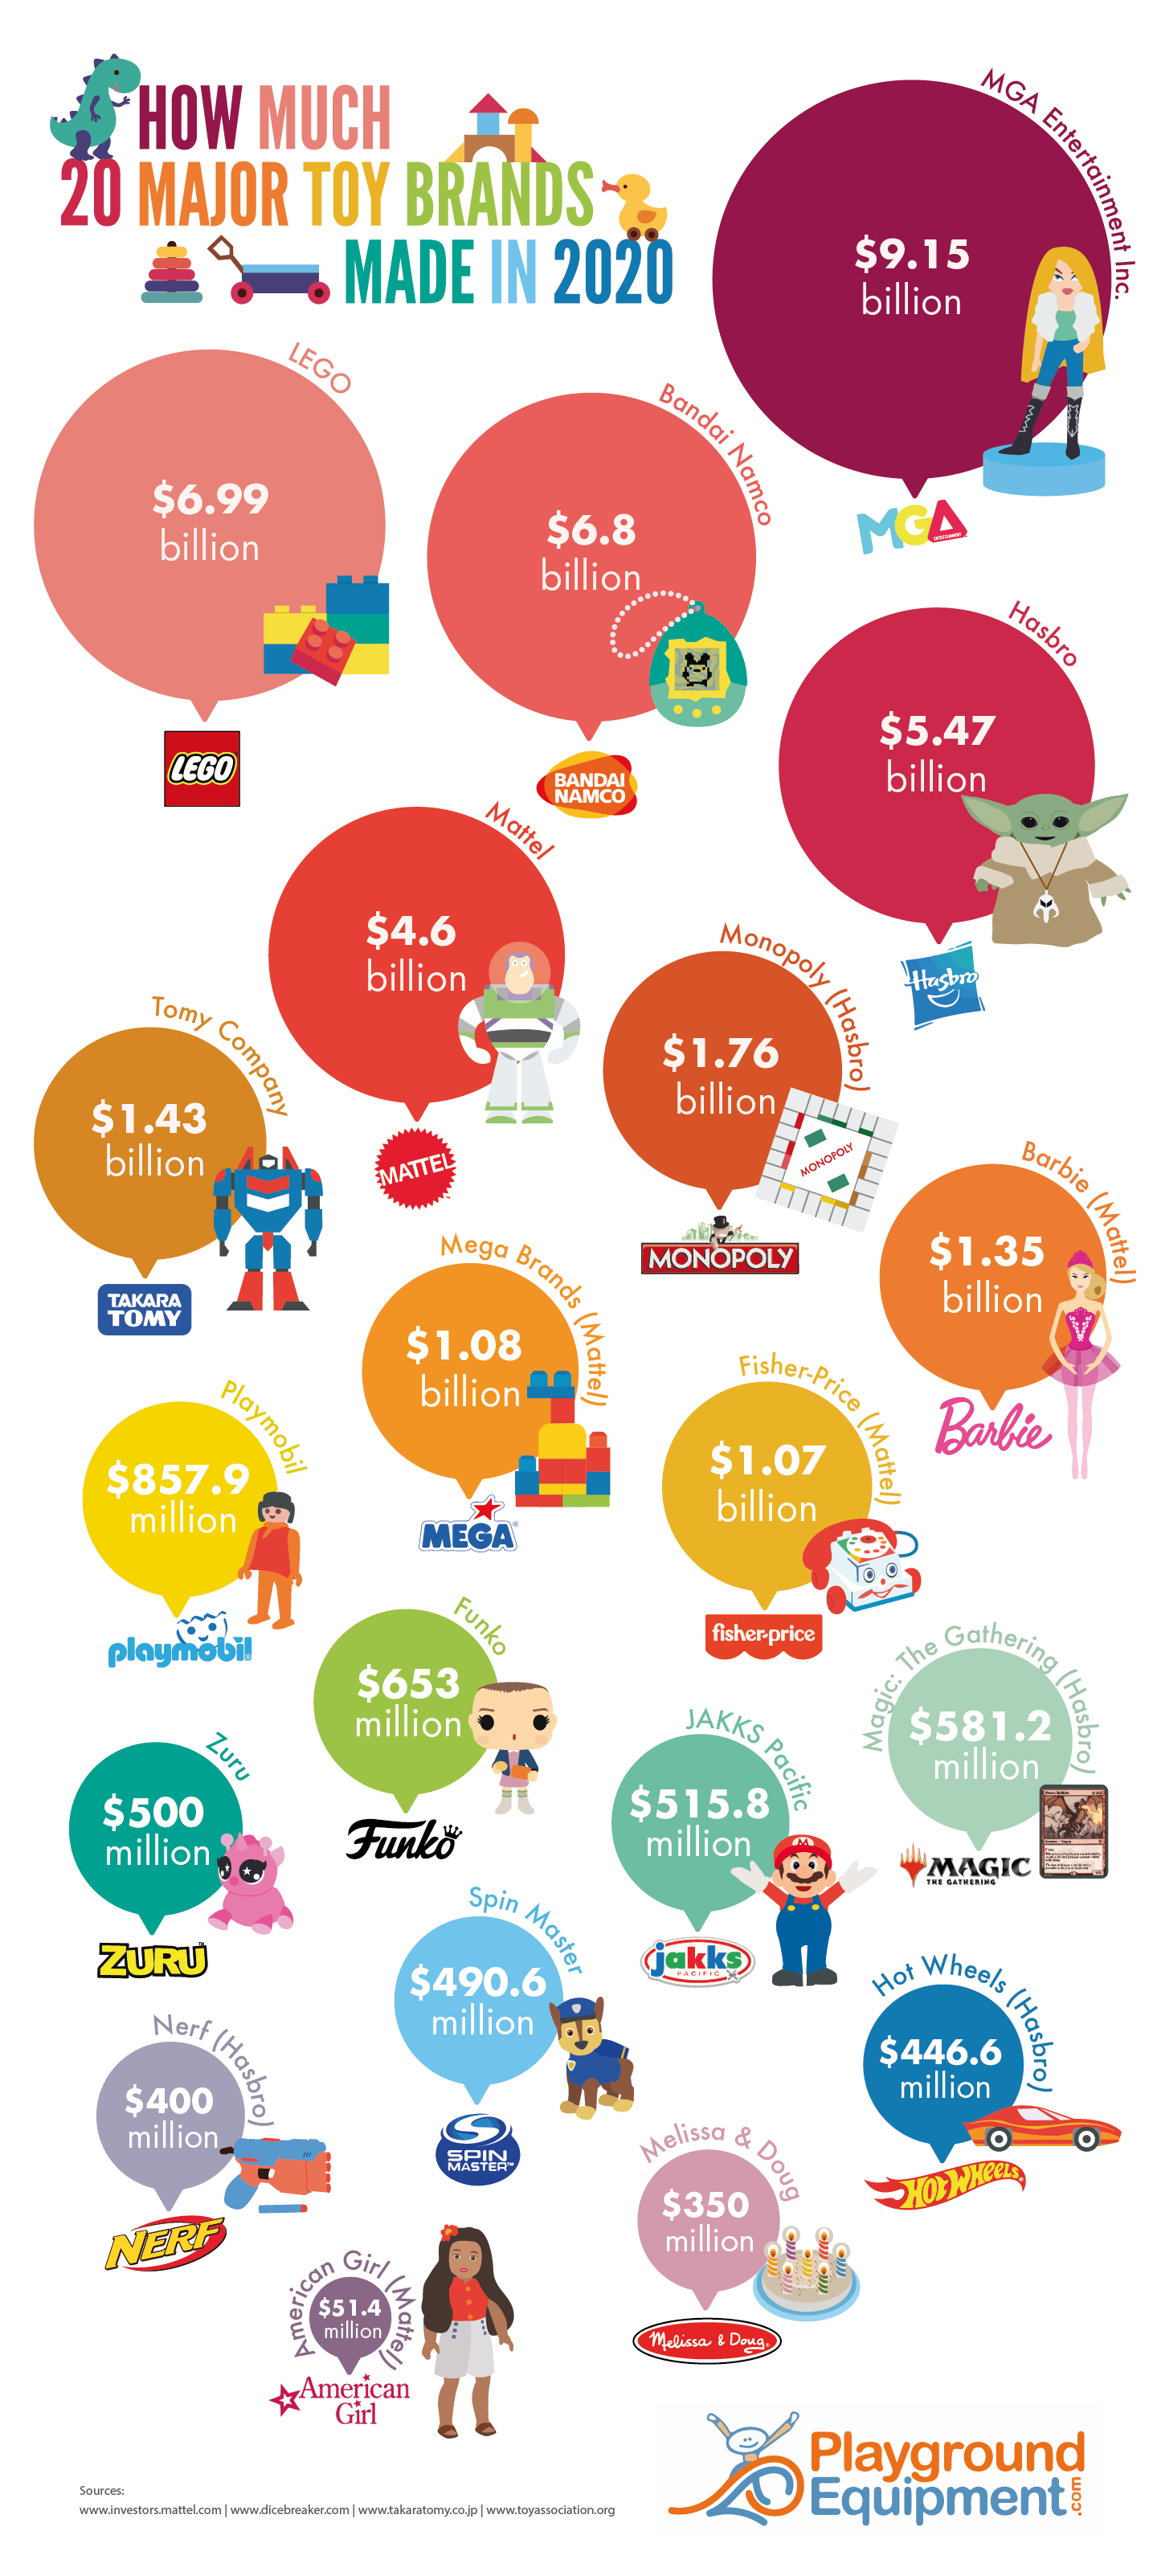 How Major Toy Brands Made in PlaygroundEquipment.com